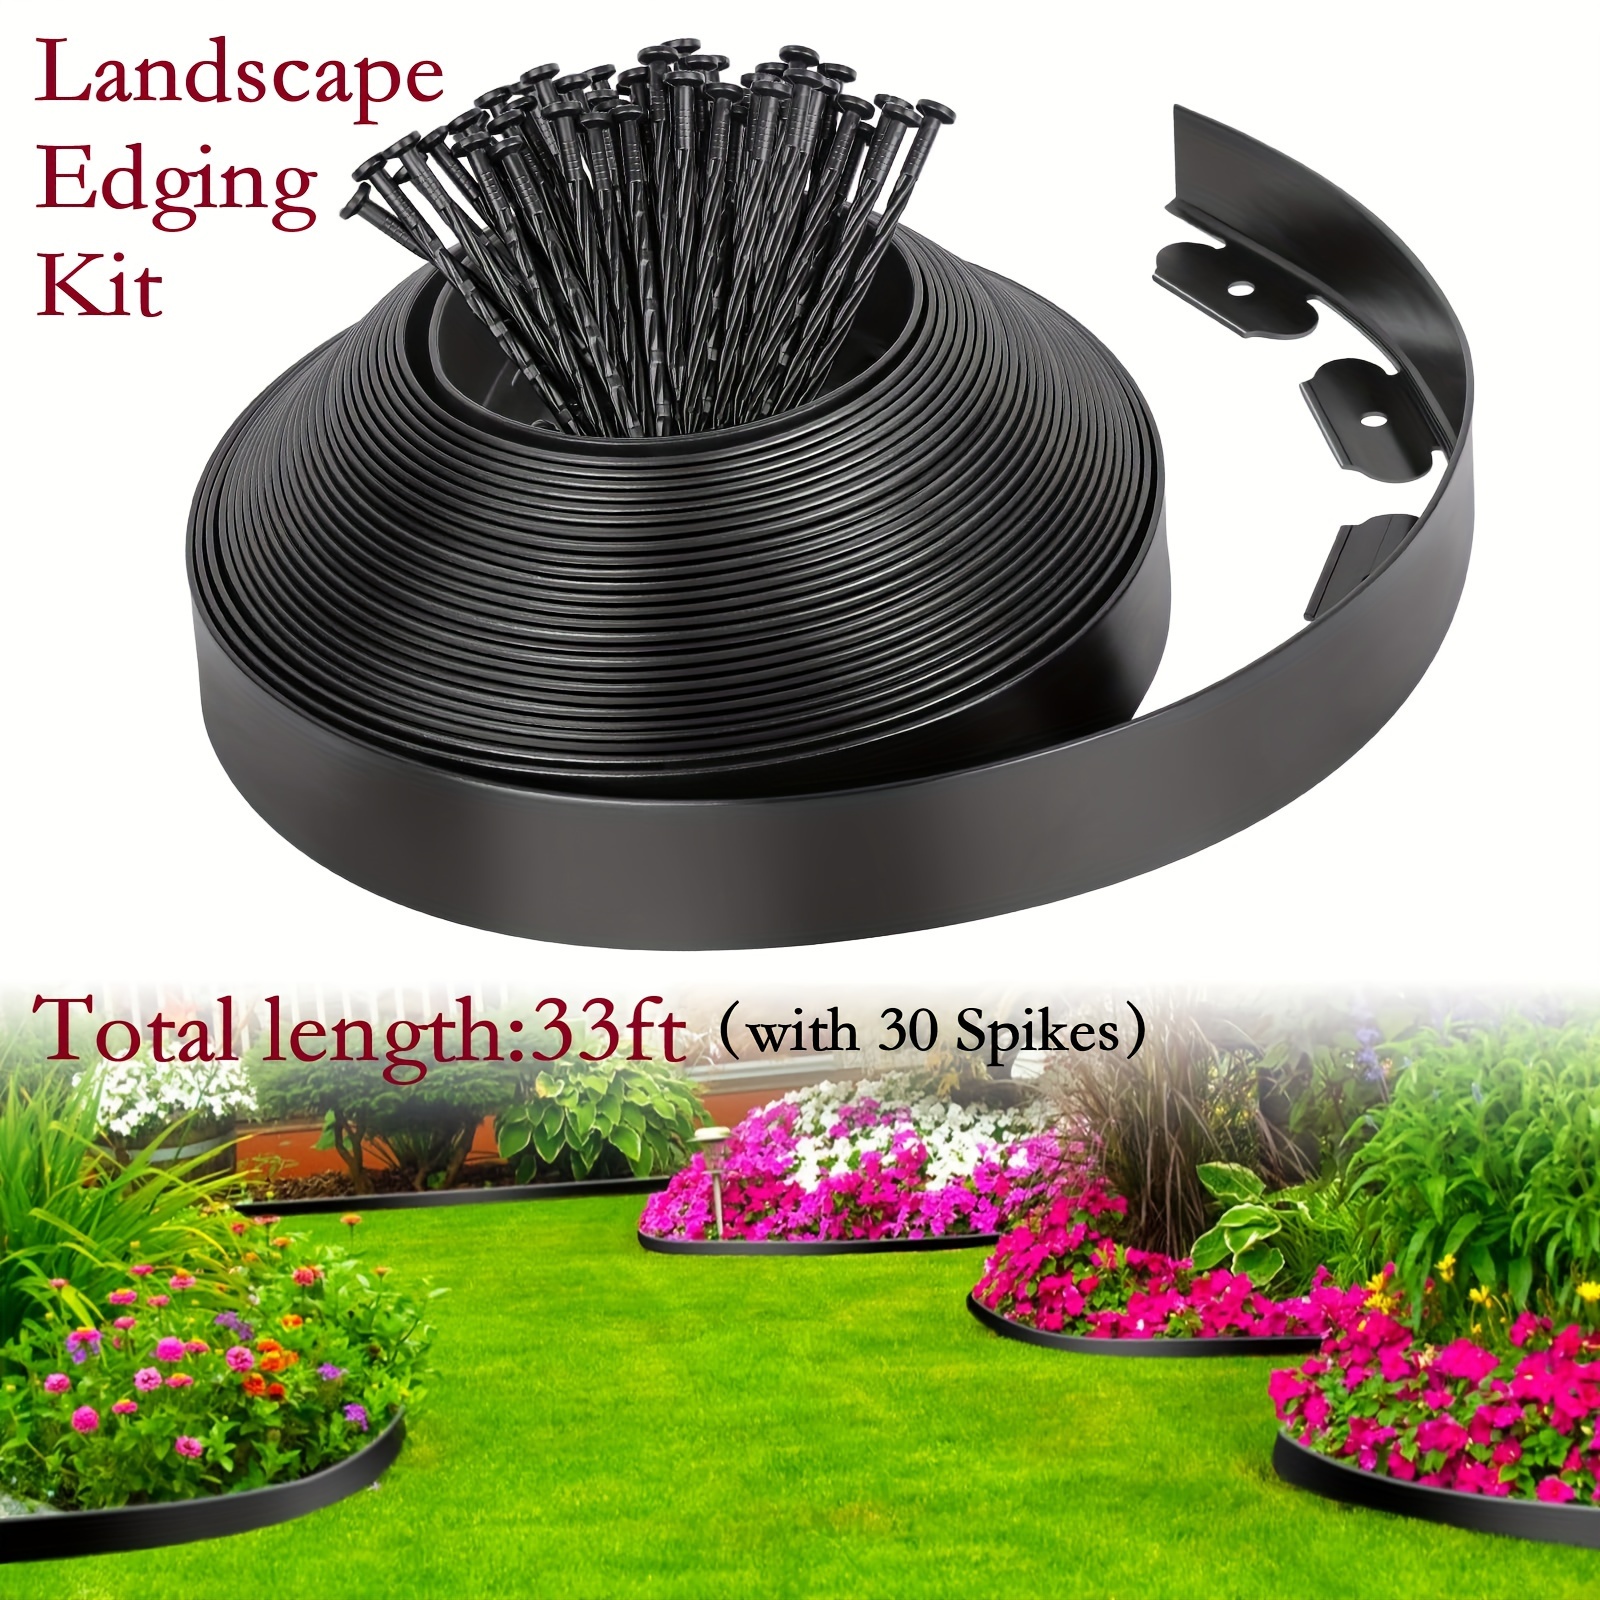 

Landscape Edging Border Kit, 33 Ft With 30 Spikes, 2" Tall No Dig Garden Edging Lawn Border, For Landscaping Flower Beds Yard